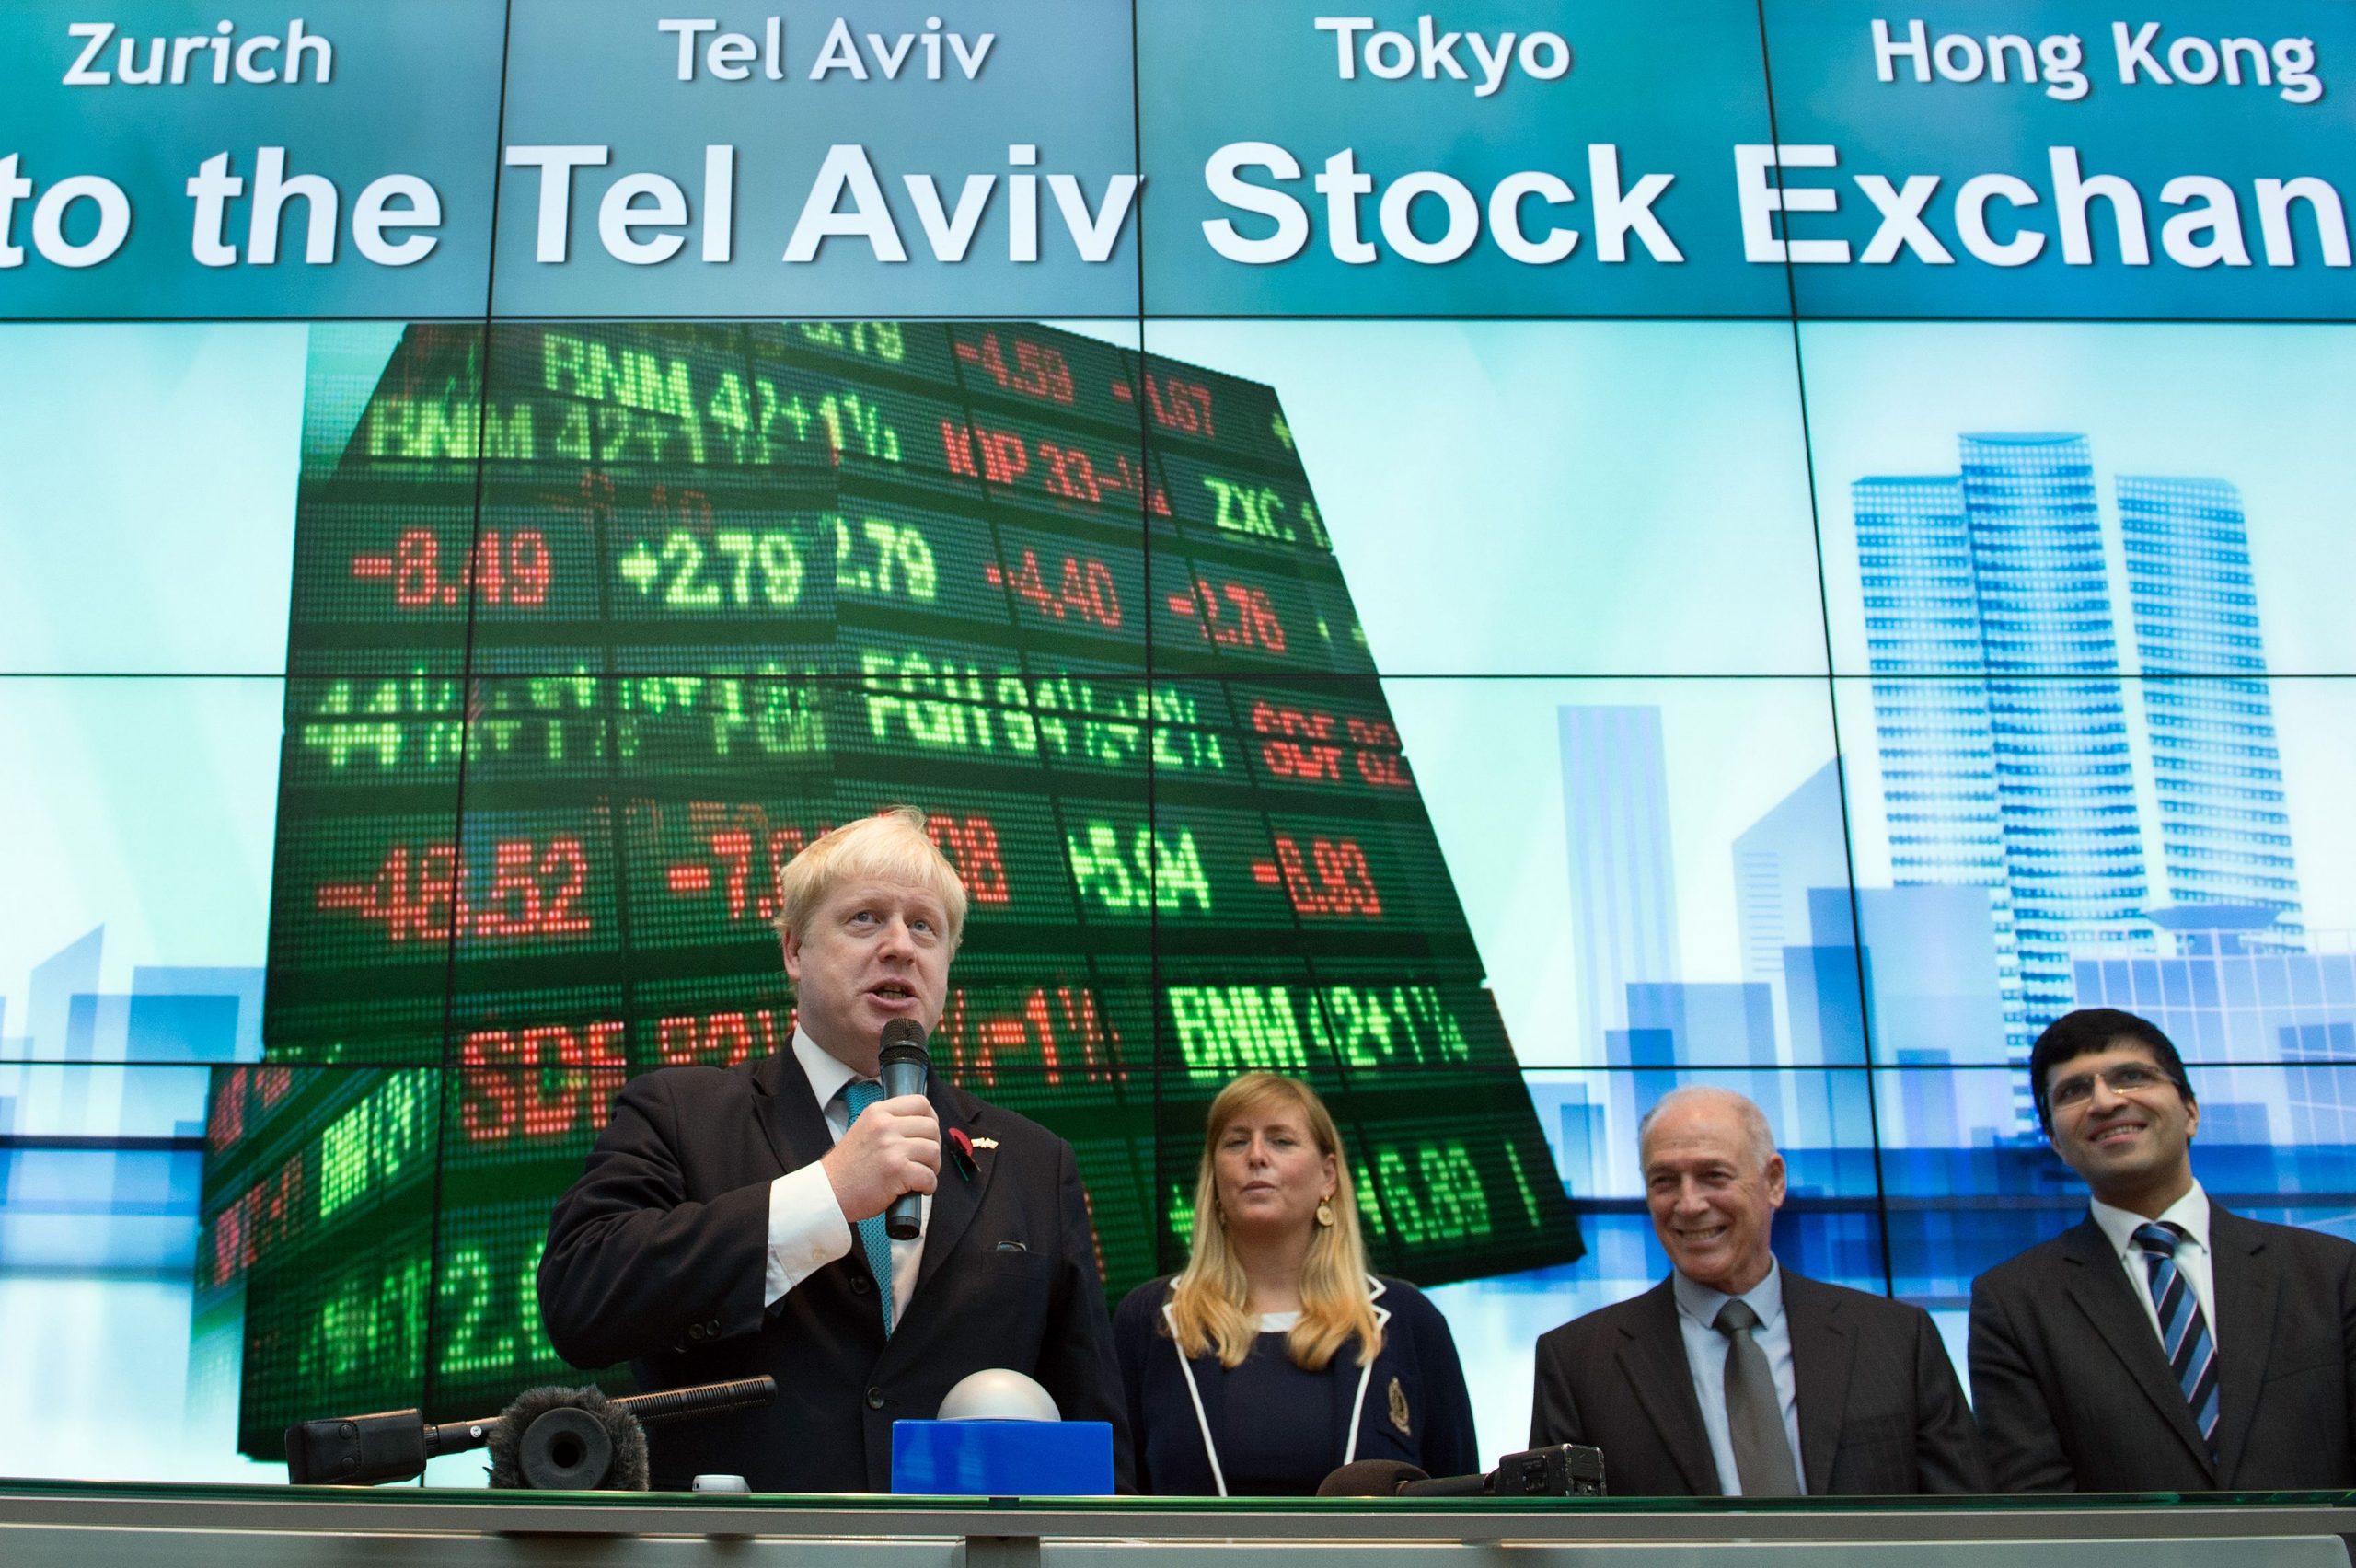 Britain’s Boris Johnson kicks off trading on the Tel Aviv Stock Exchange during a visit. Israeli companies have enjoyed record investments over the last year, underscoring the failure of efforts by the Boycott, Divestment and Sanctions movement to damage Israel economically.